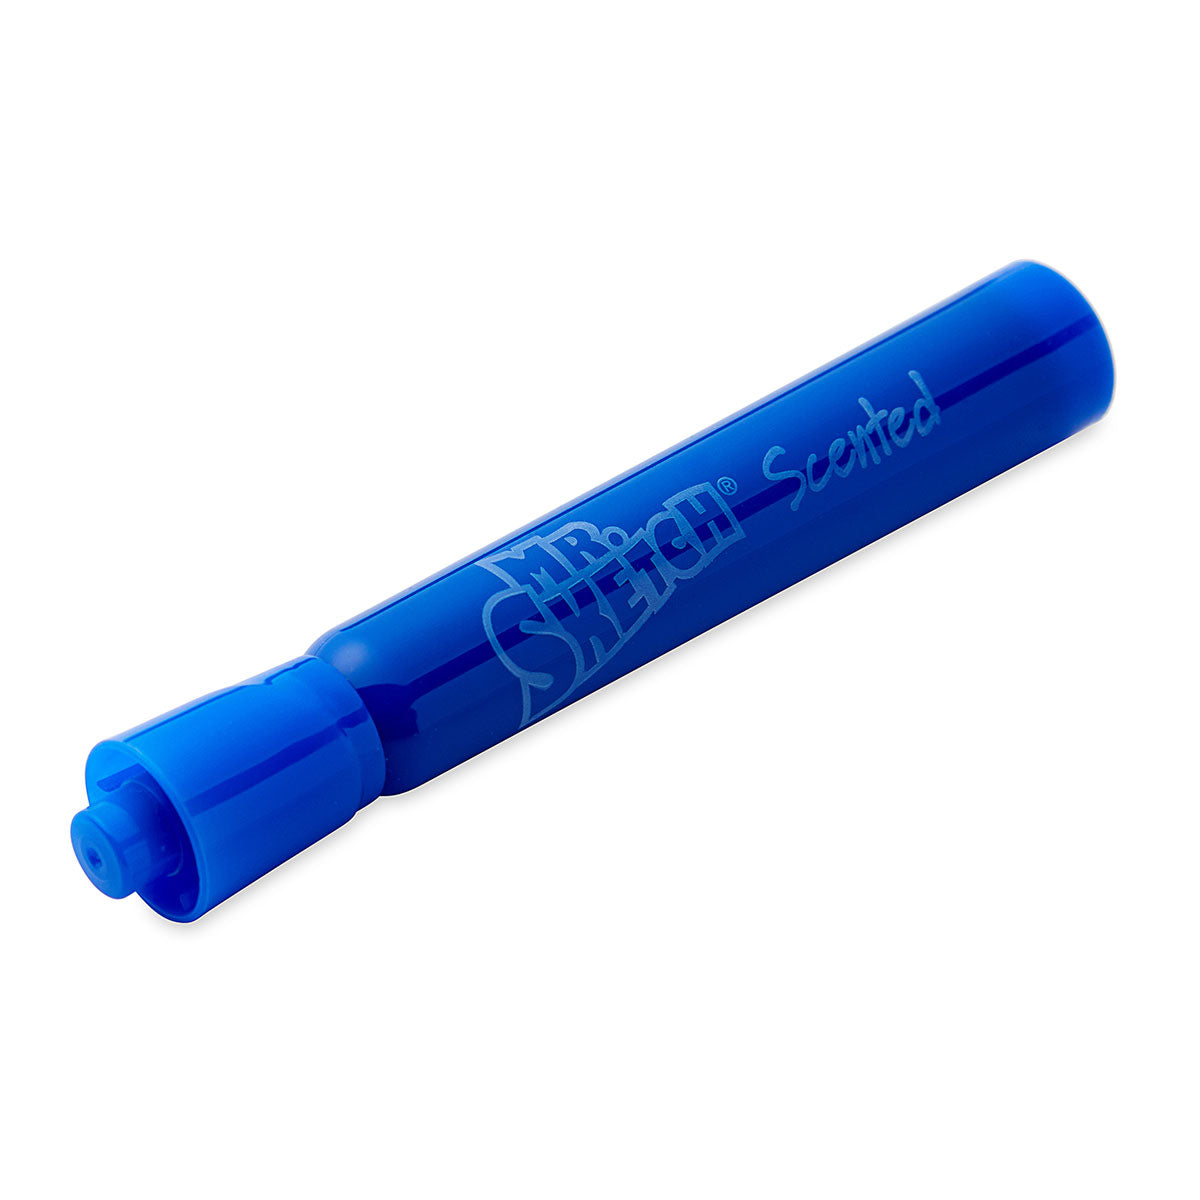 Mr. Sketch Blueberry Scented Markers Blue Color, Dozen Blueberry Smelling Markers  Mr Sketch Scented Markers